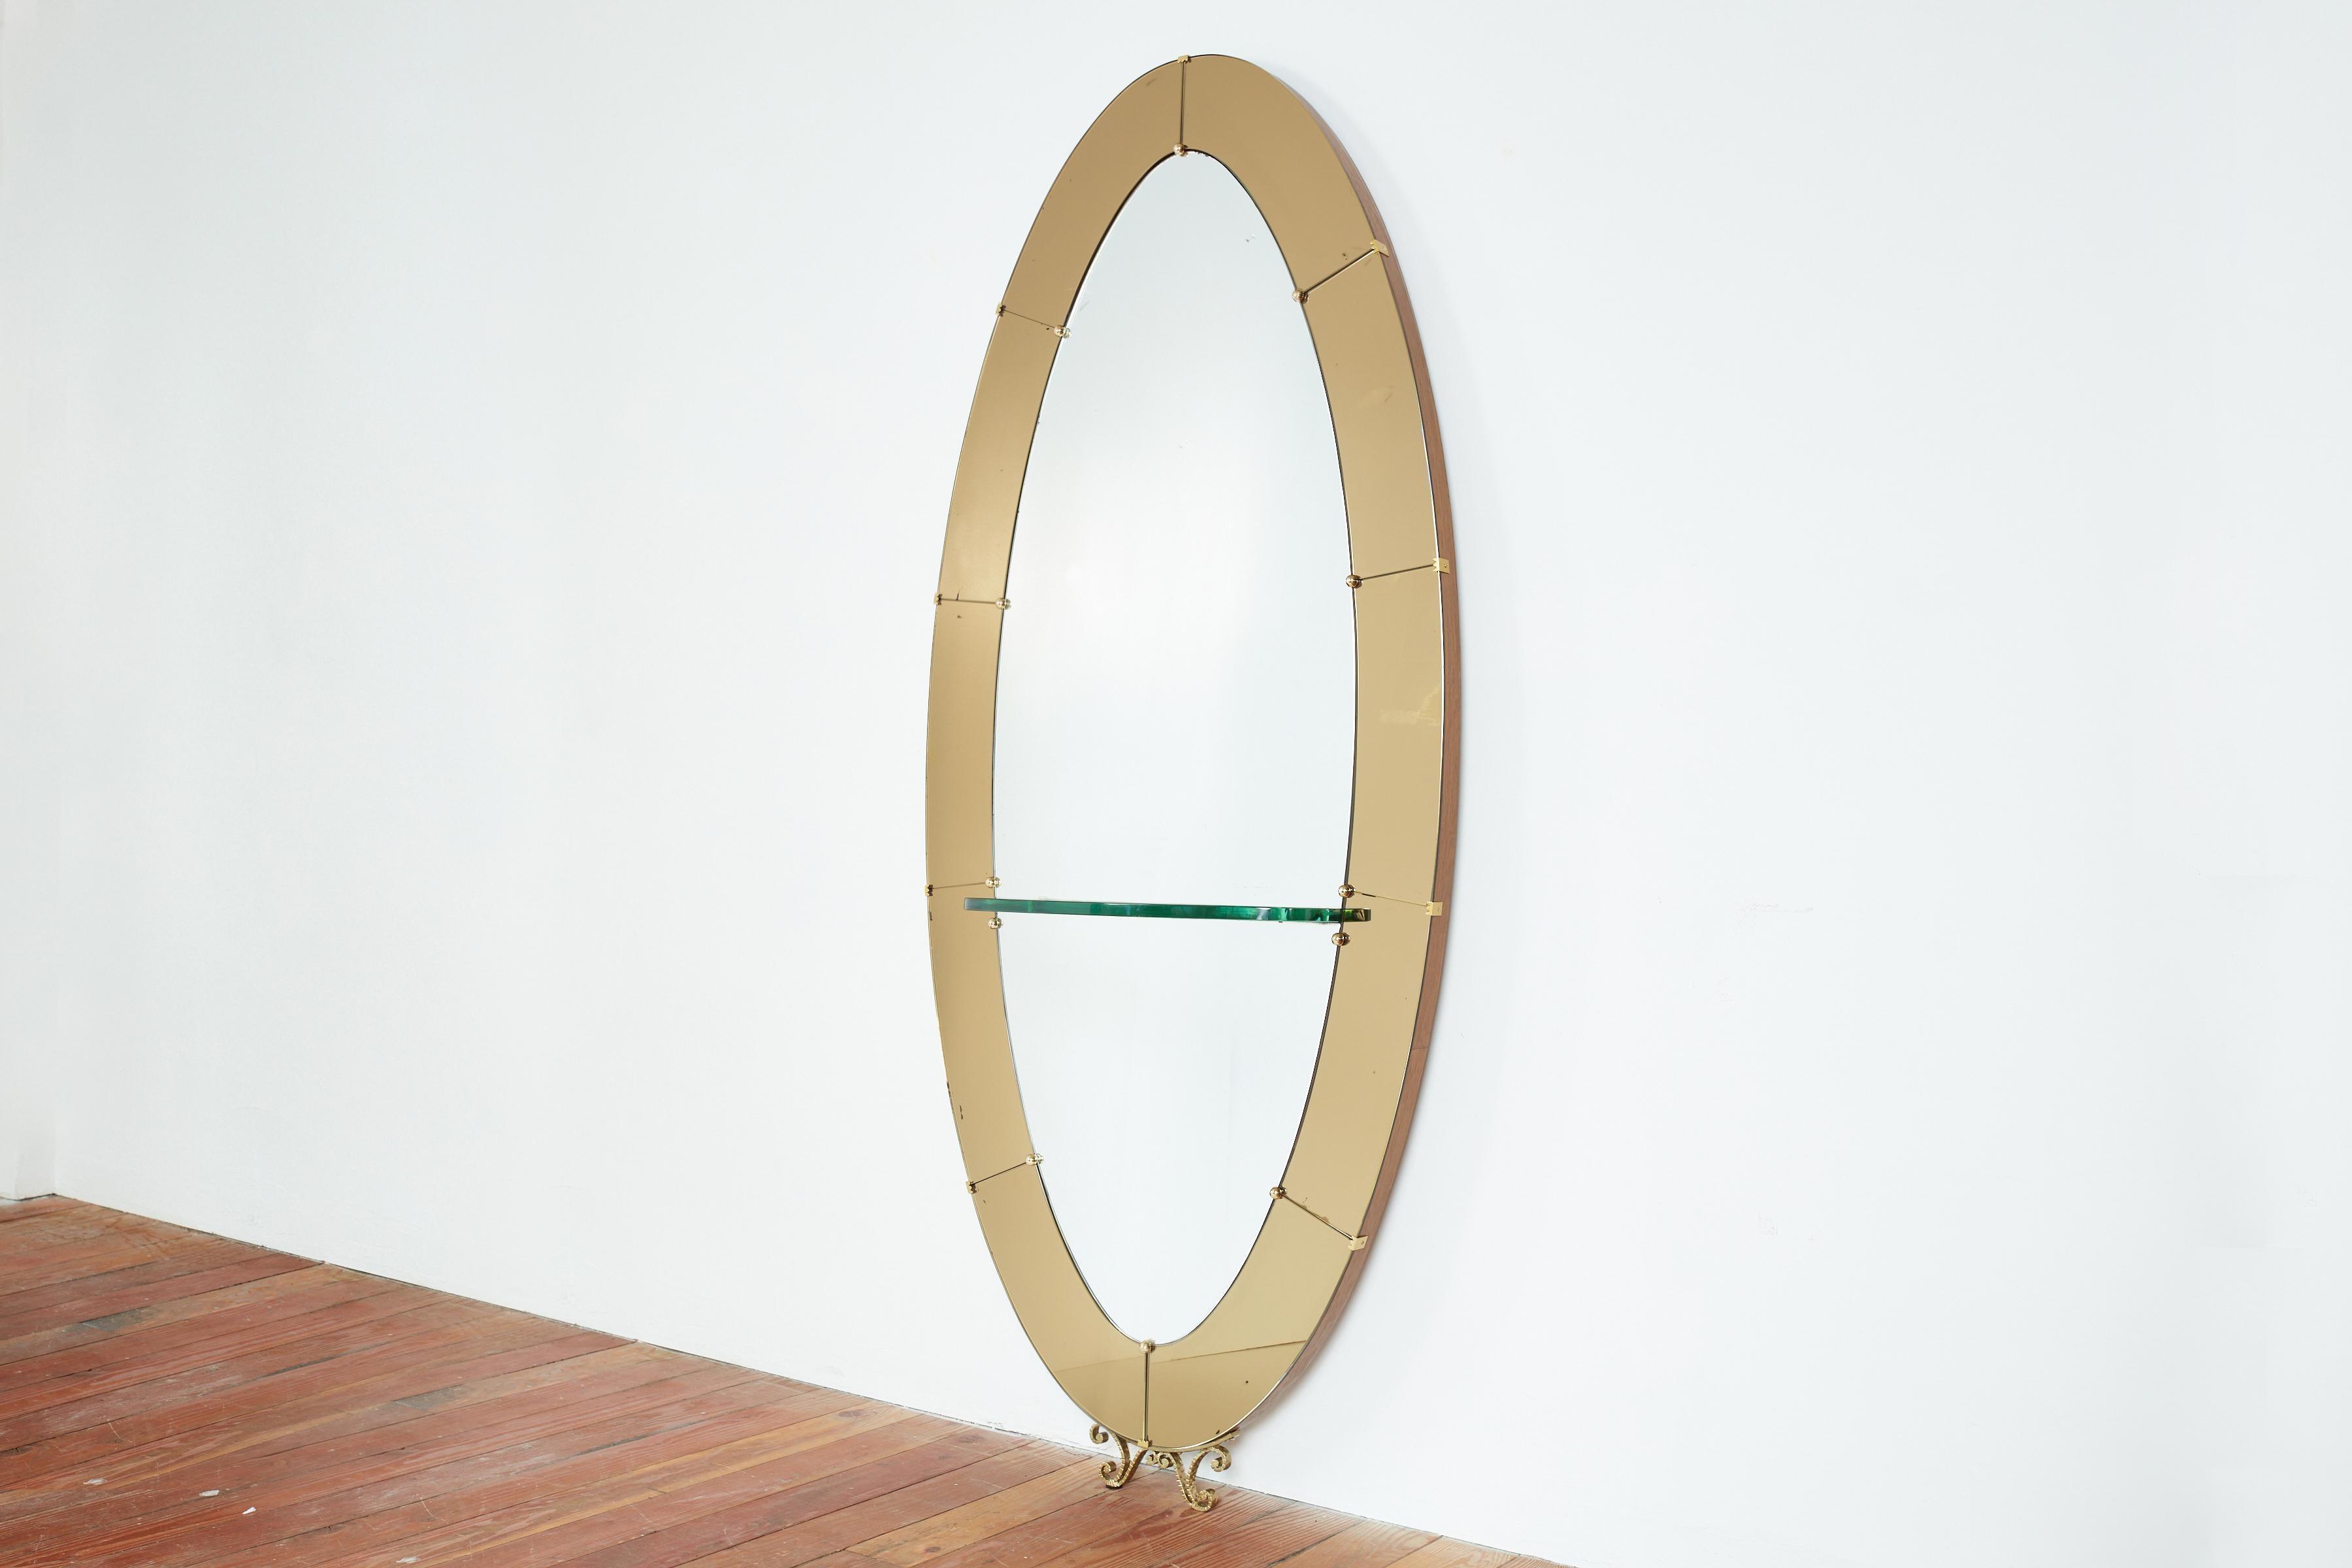 Gorgeous large Cristal Art wall mirror with shelf with gold yellow glass and decorative brass base.

Oval shape with original patina'd mirror and bright yellow gold colored glass encompassed in a walnut wood frame w/ brass. 

Italy 1950s.